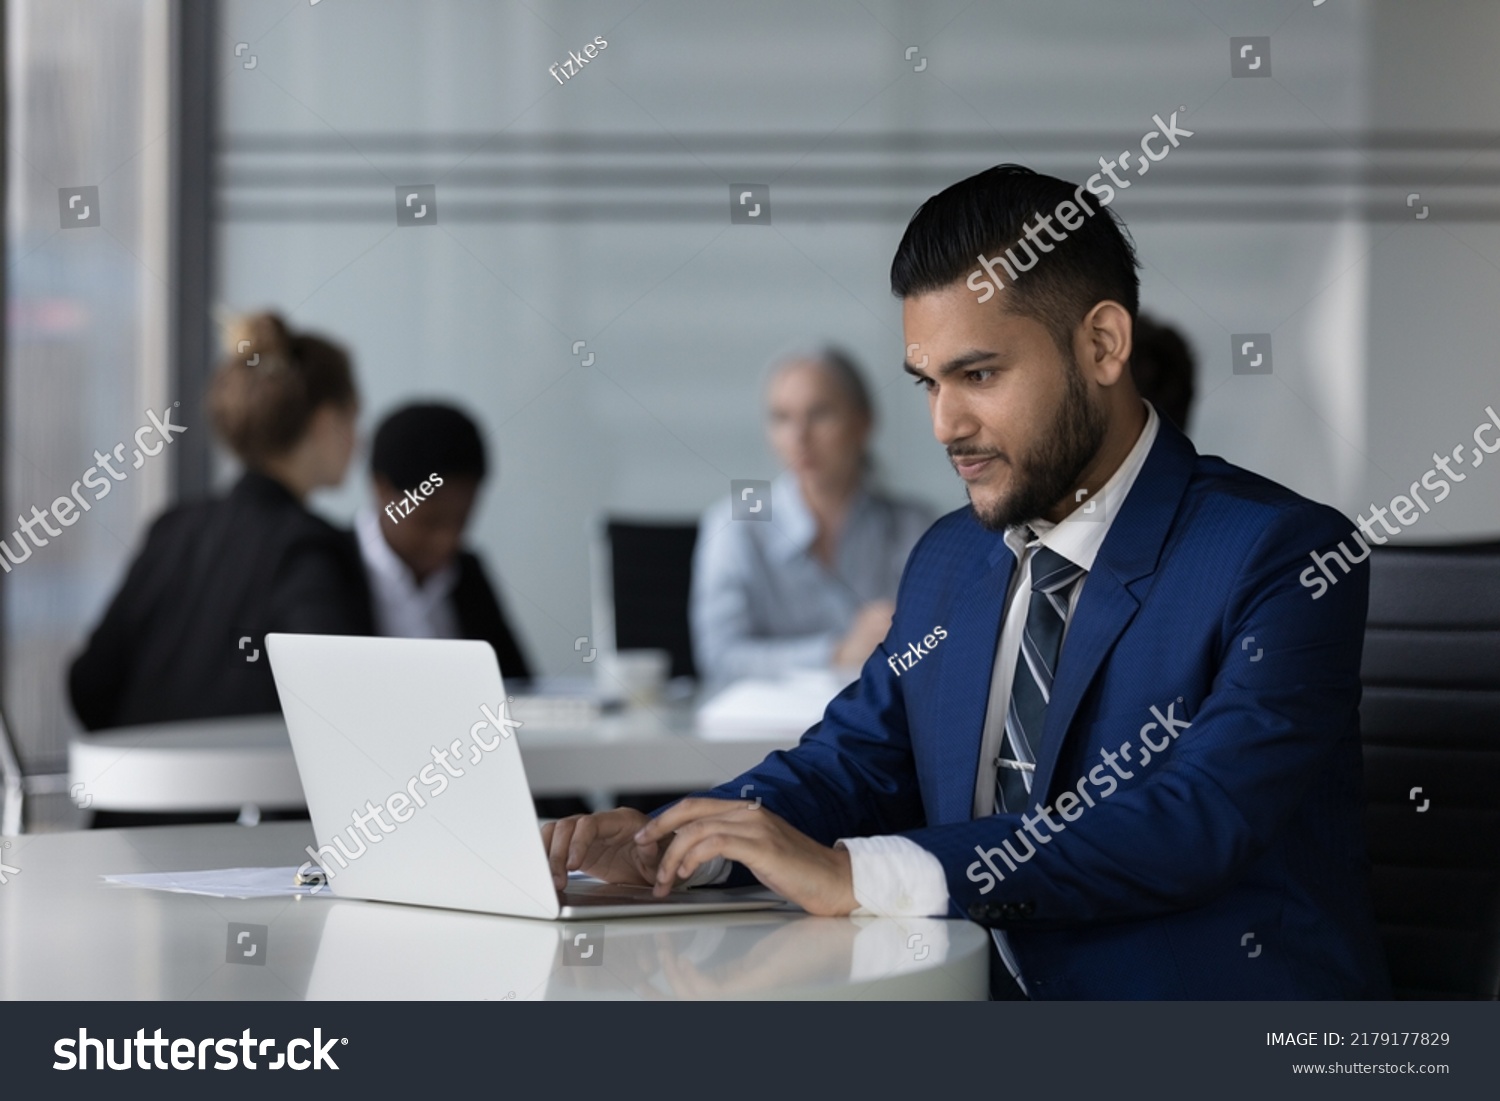 Focused Indian employee man working on online project at laptop, typing, chatting, sitting at workplace table in open office with business meeting of diverse colleagues in background #2179177829